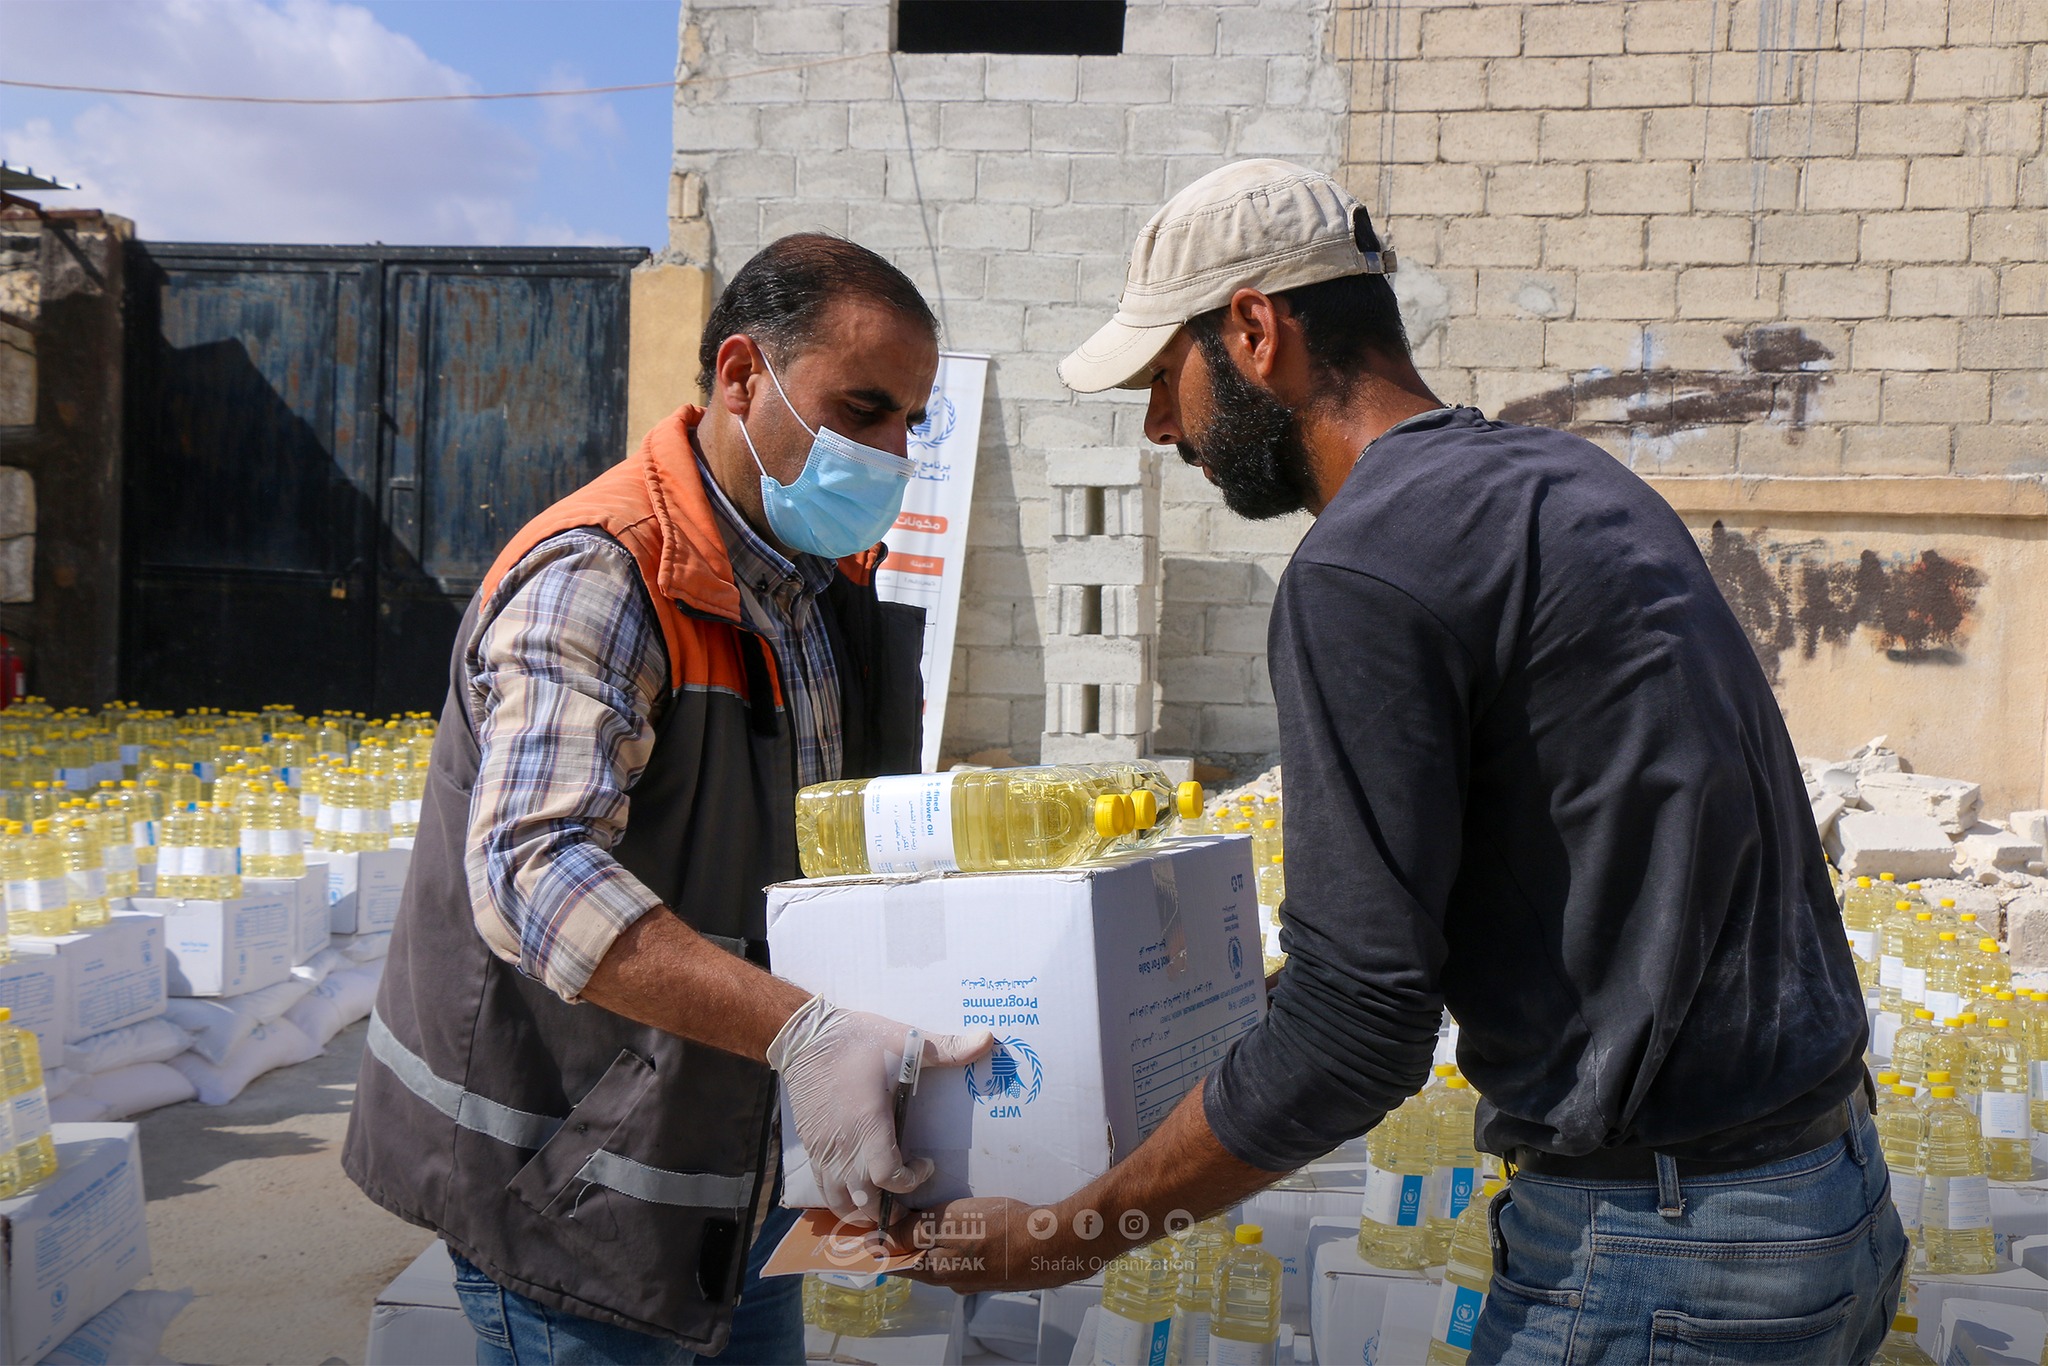 Distribution of food baskets from the World Food Programme (WFP) through the Shafak organization in northern Syria - September 28, 2022 (Shafak)